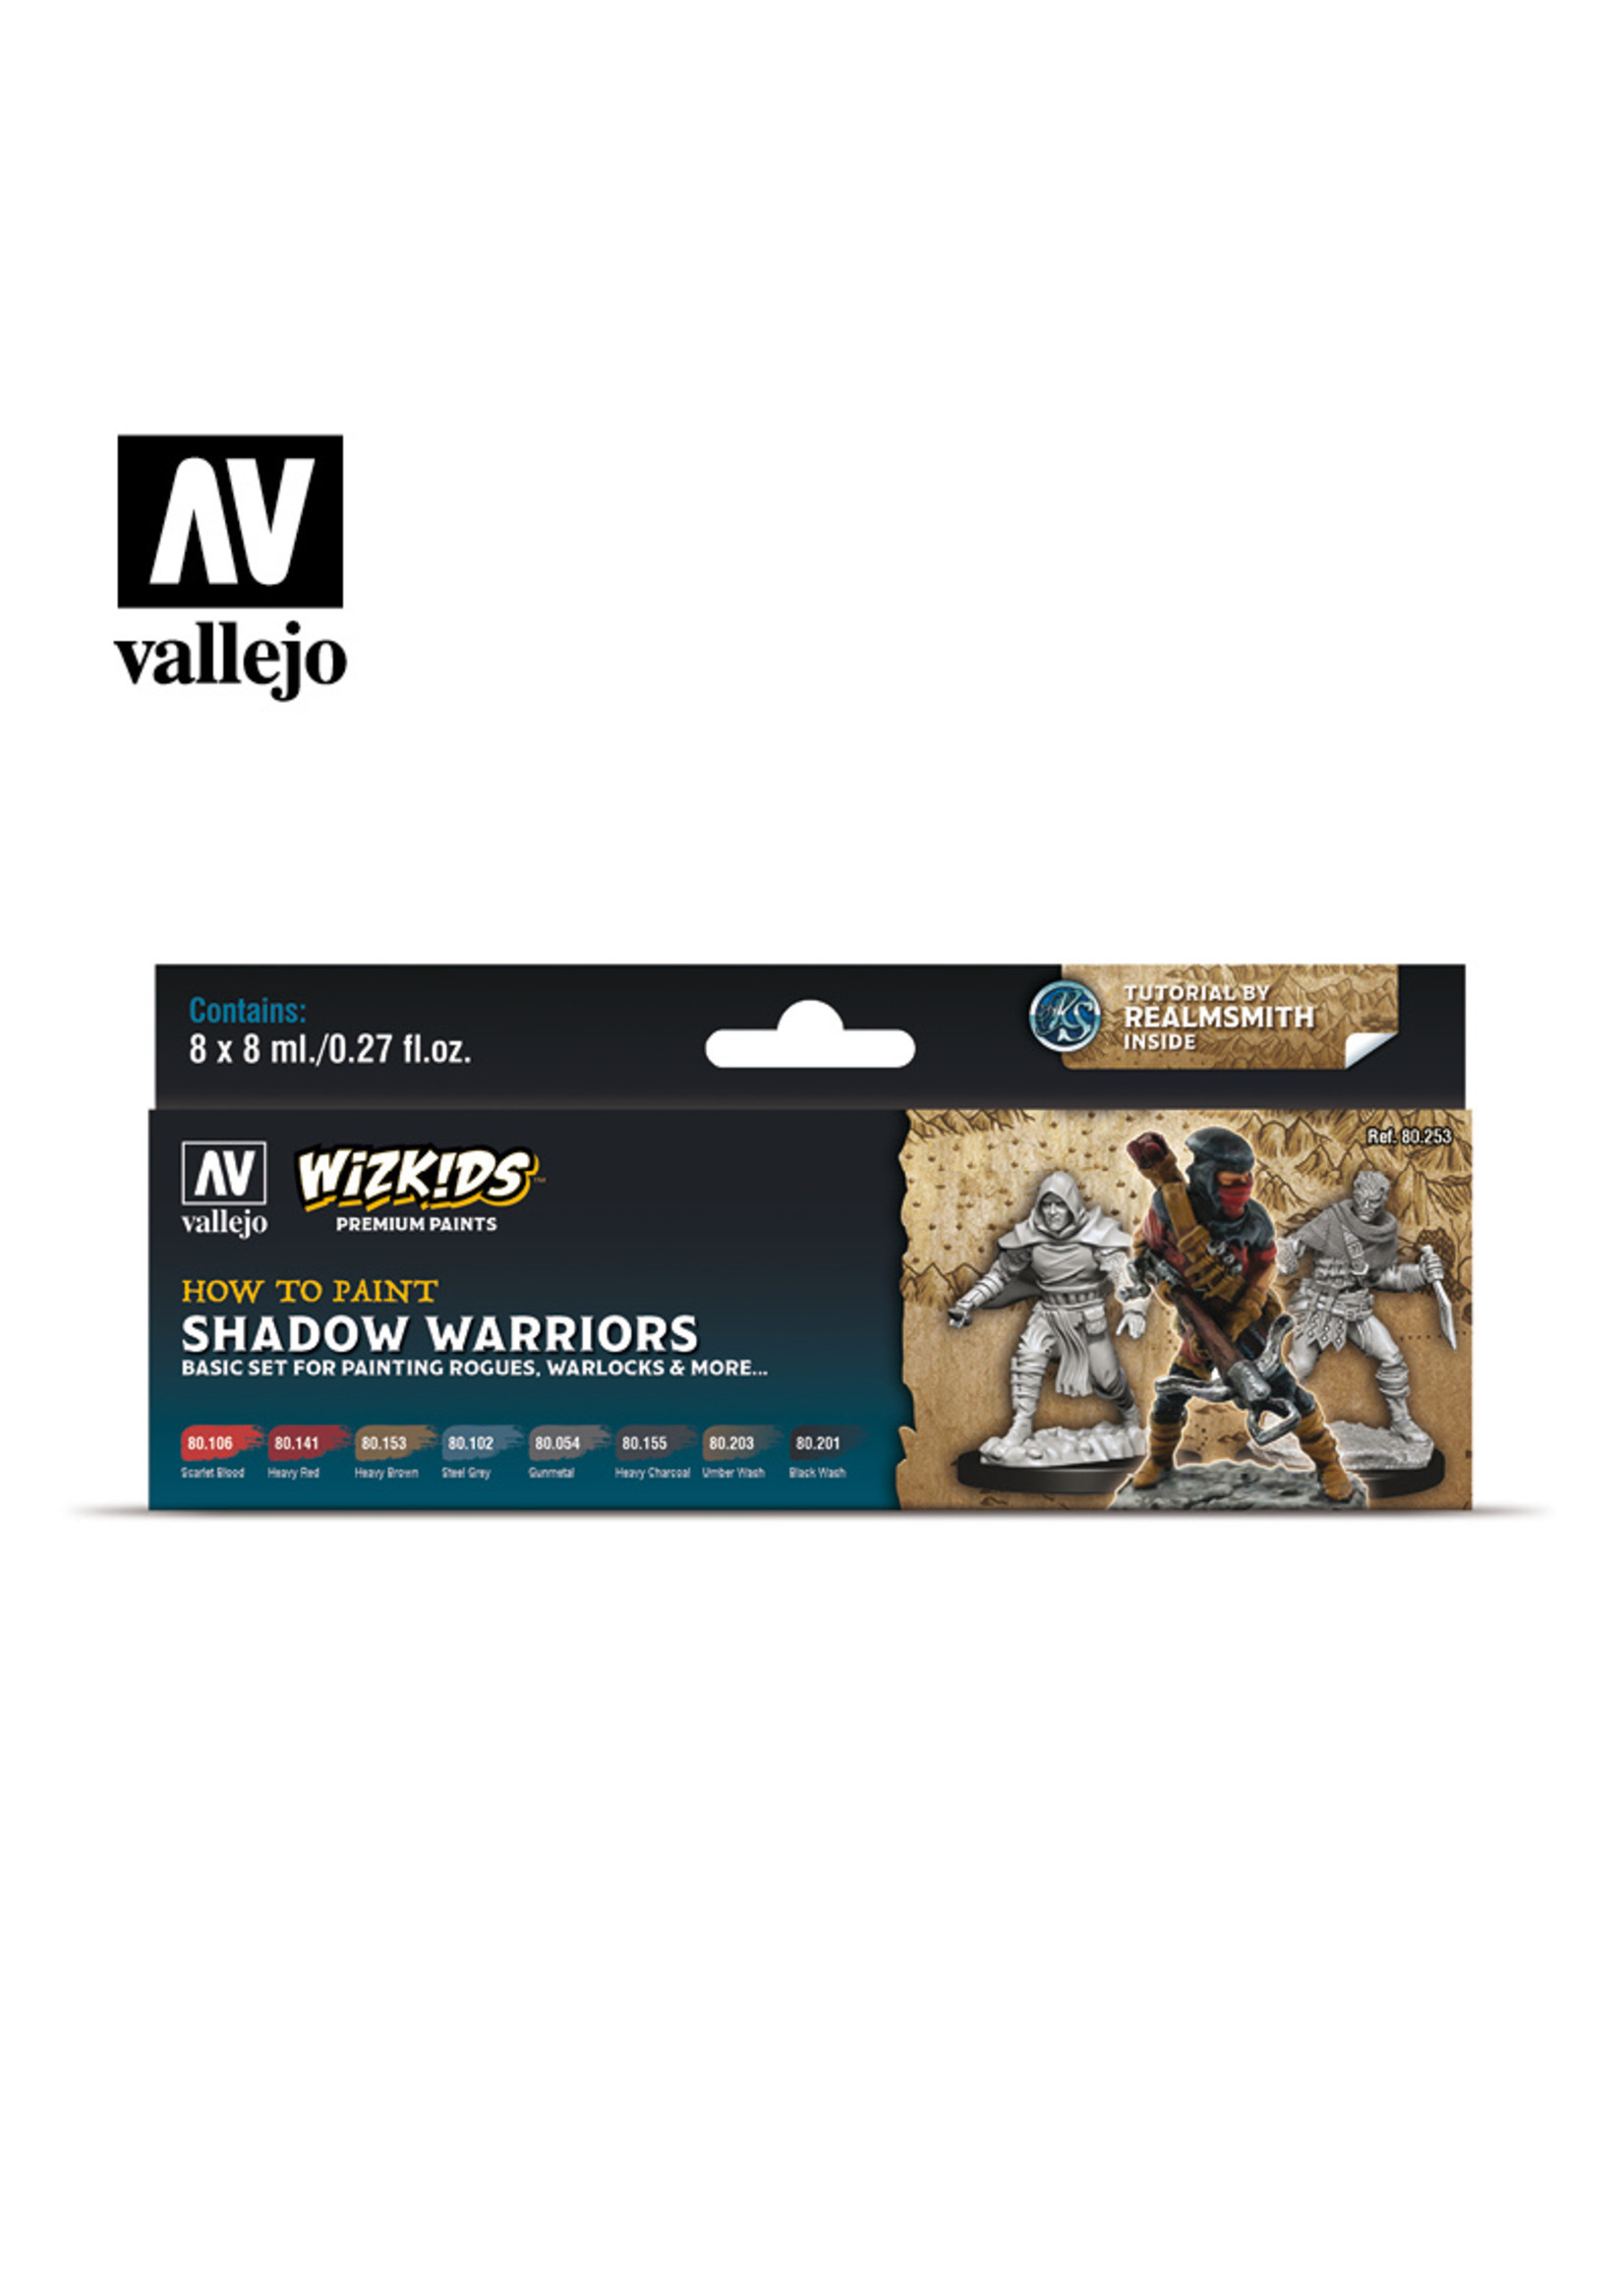 Vallejo Themed Paint Sets with Tutorials and Miniature